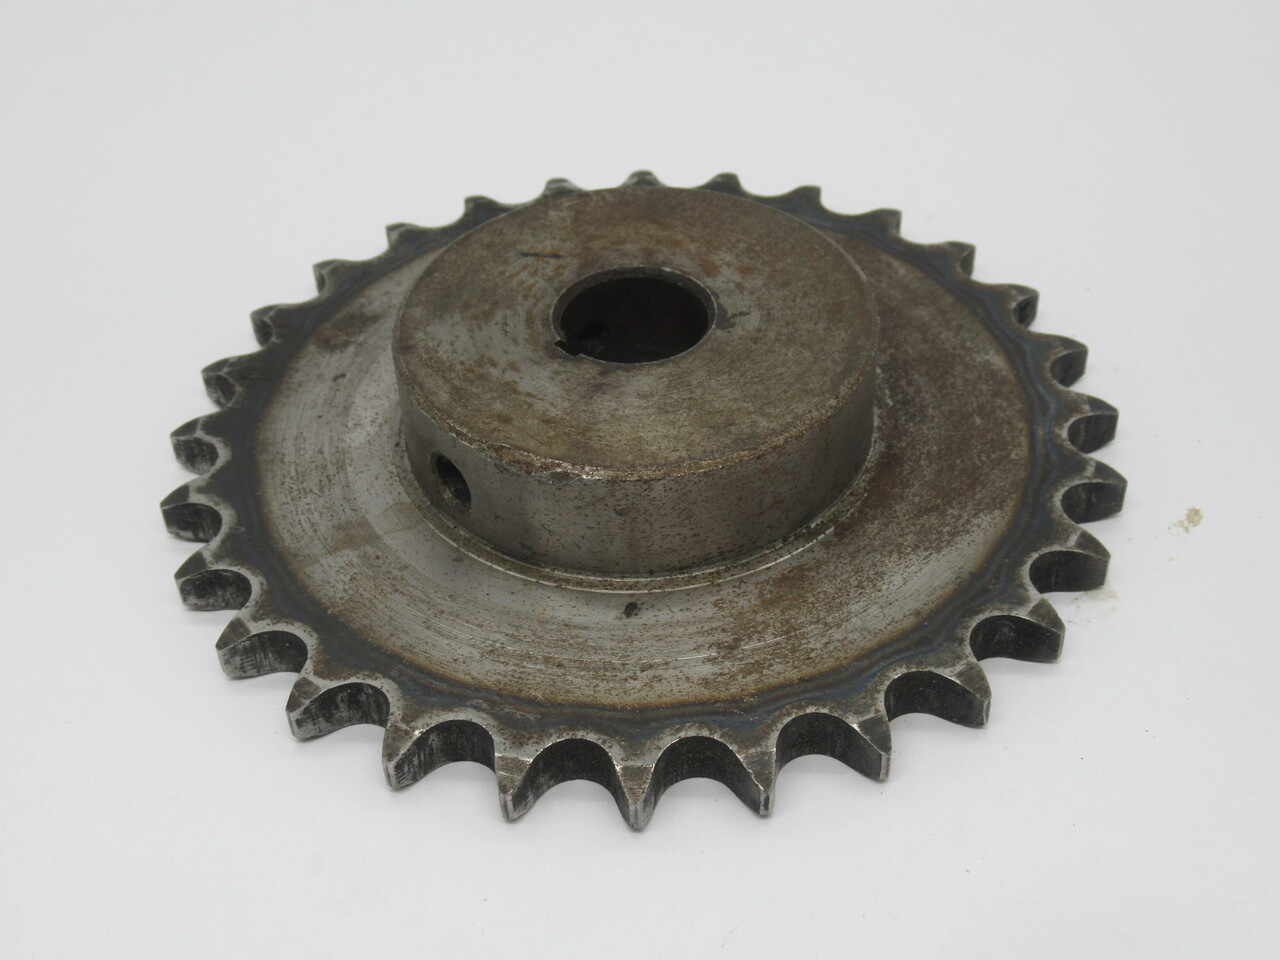 Generic 50B28 Roller Chain Sprocket 1" Bore 28 Teeth 50 Chain 5/8" Pitch USED